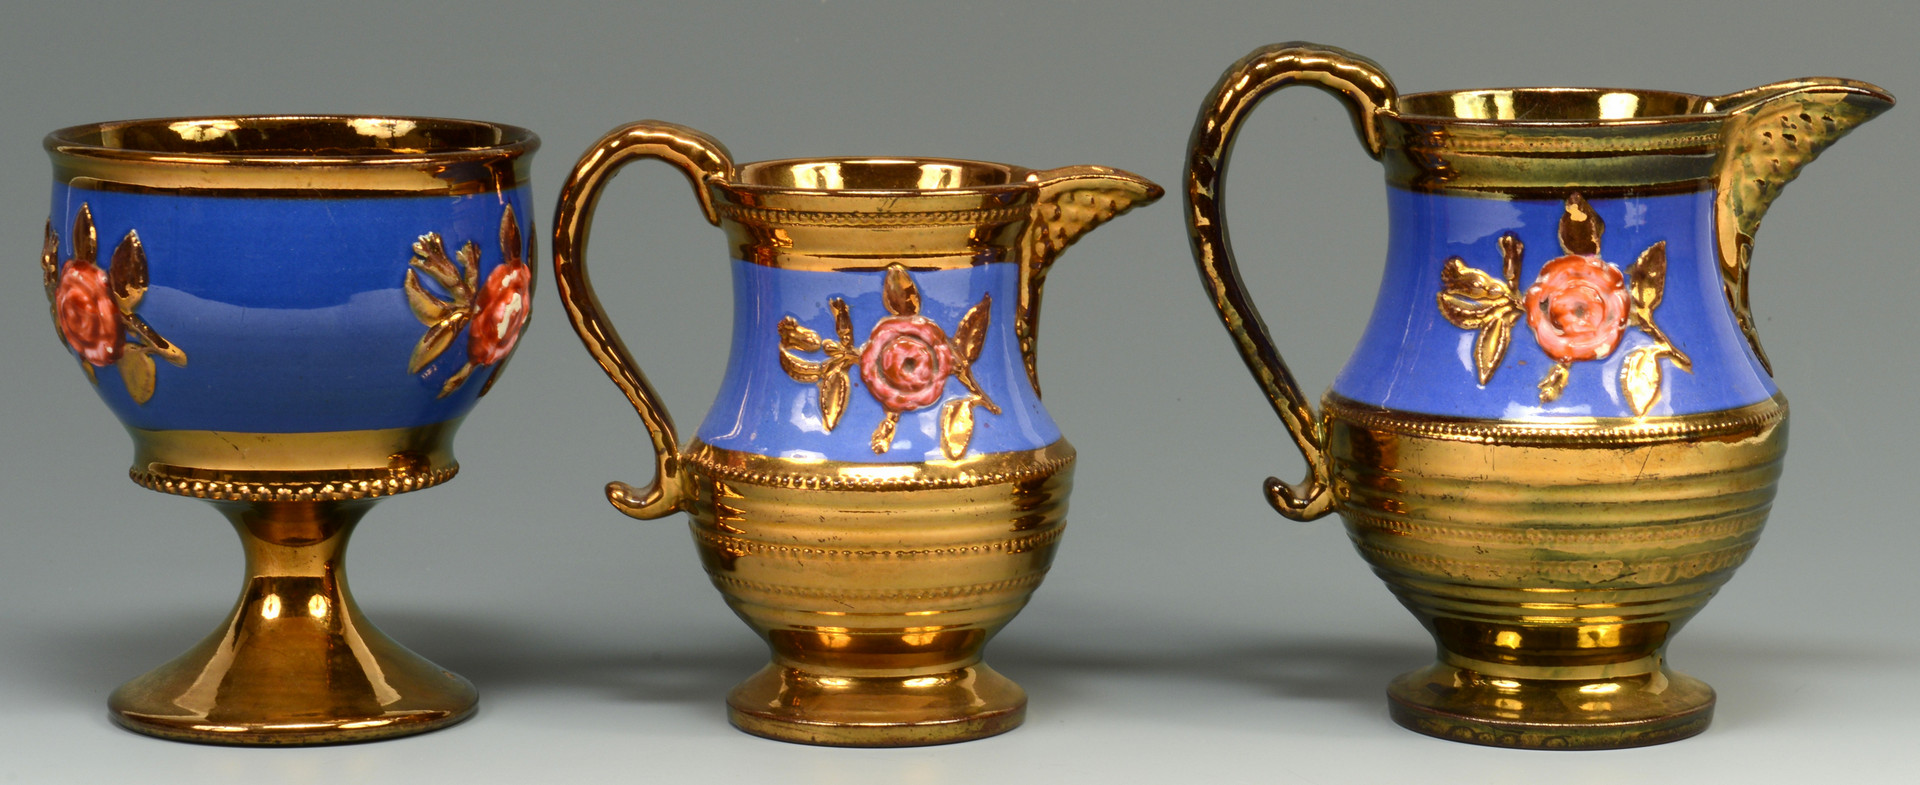 Lot 885: Group of English Copper Lusterware